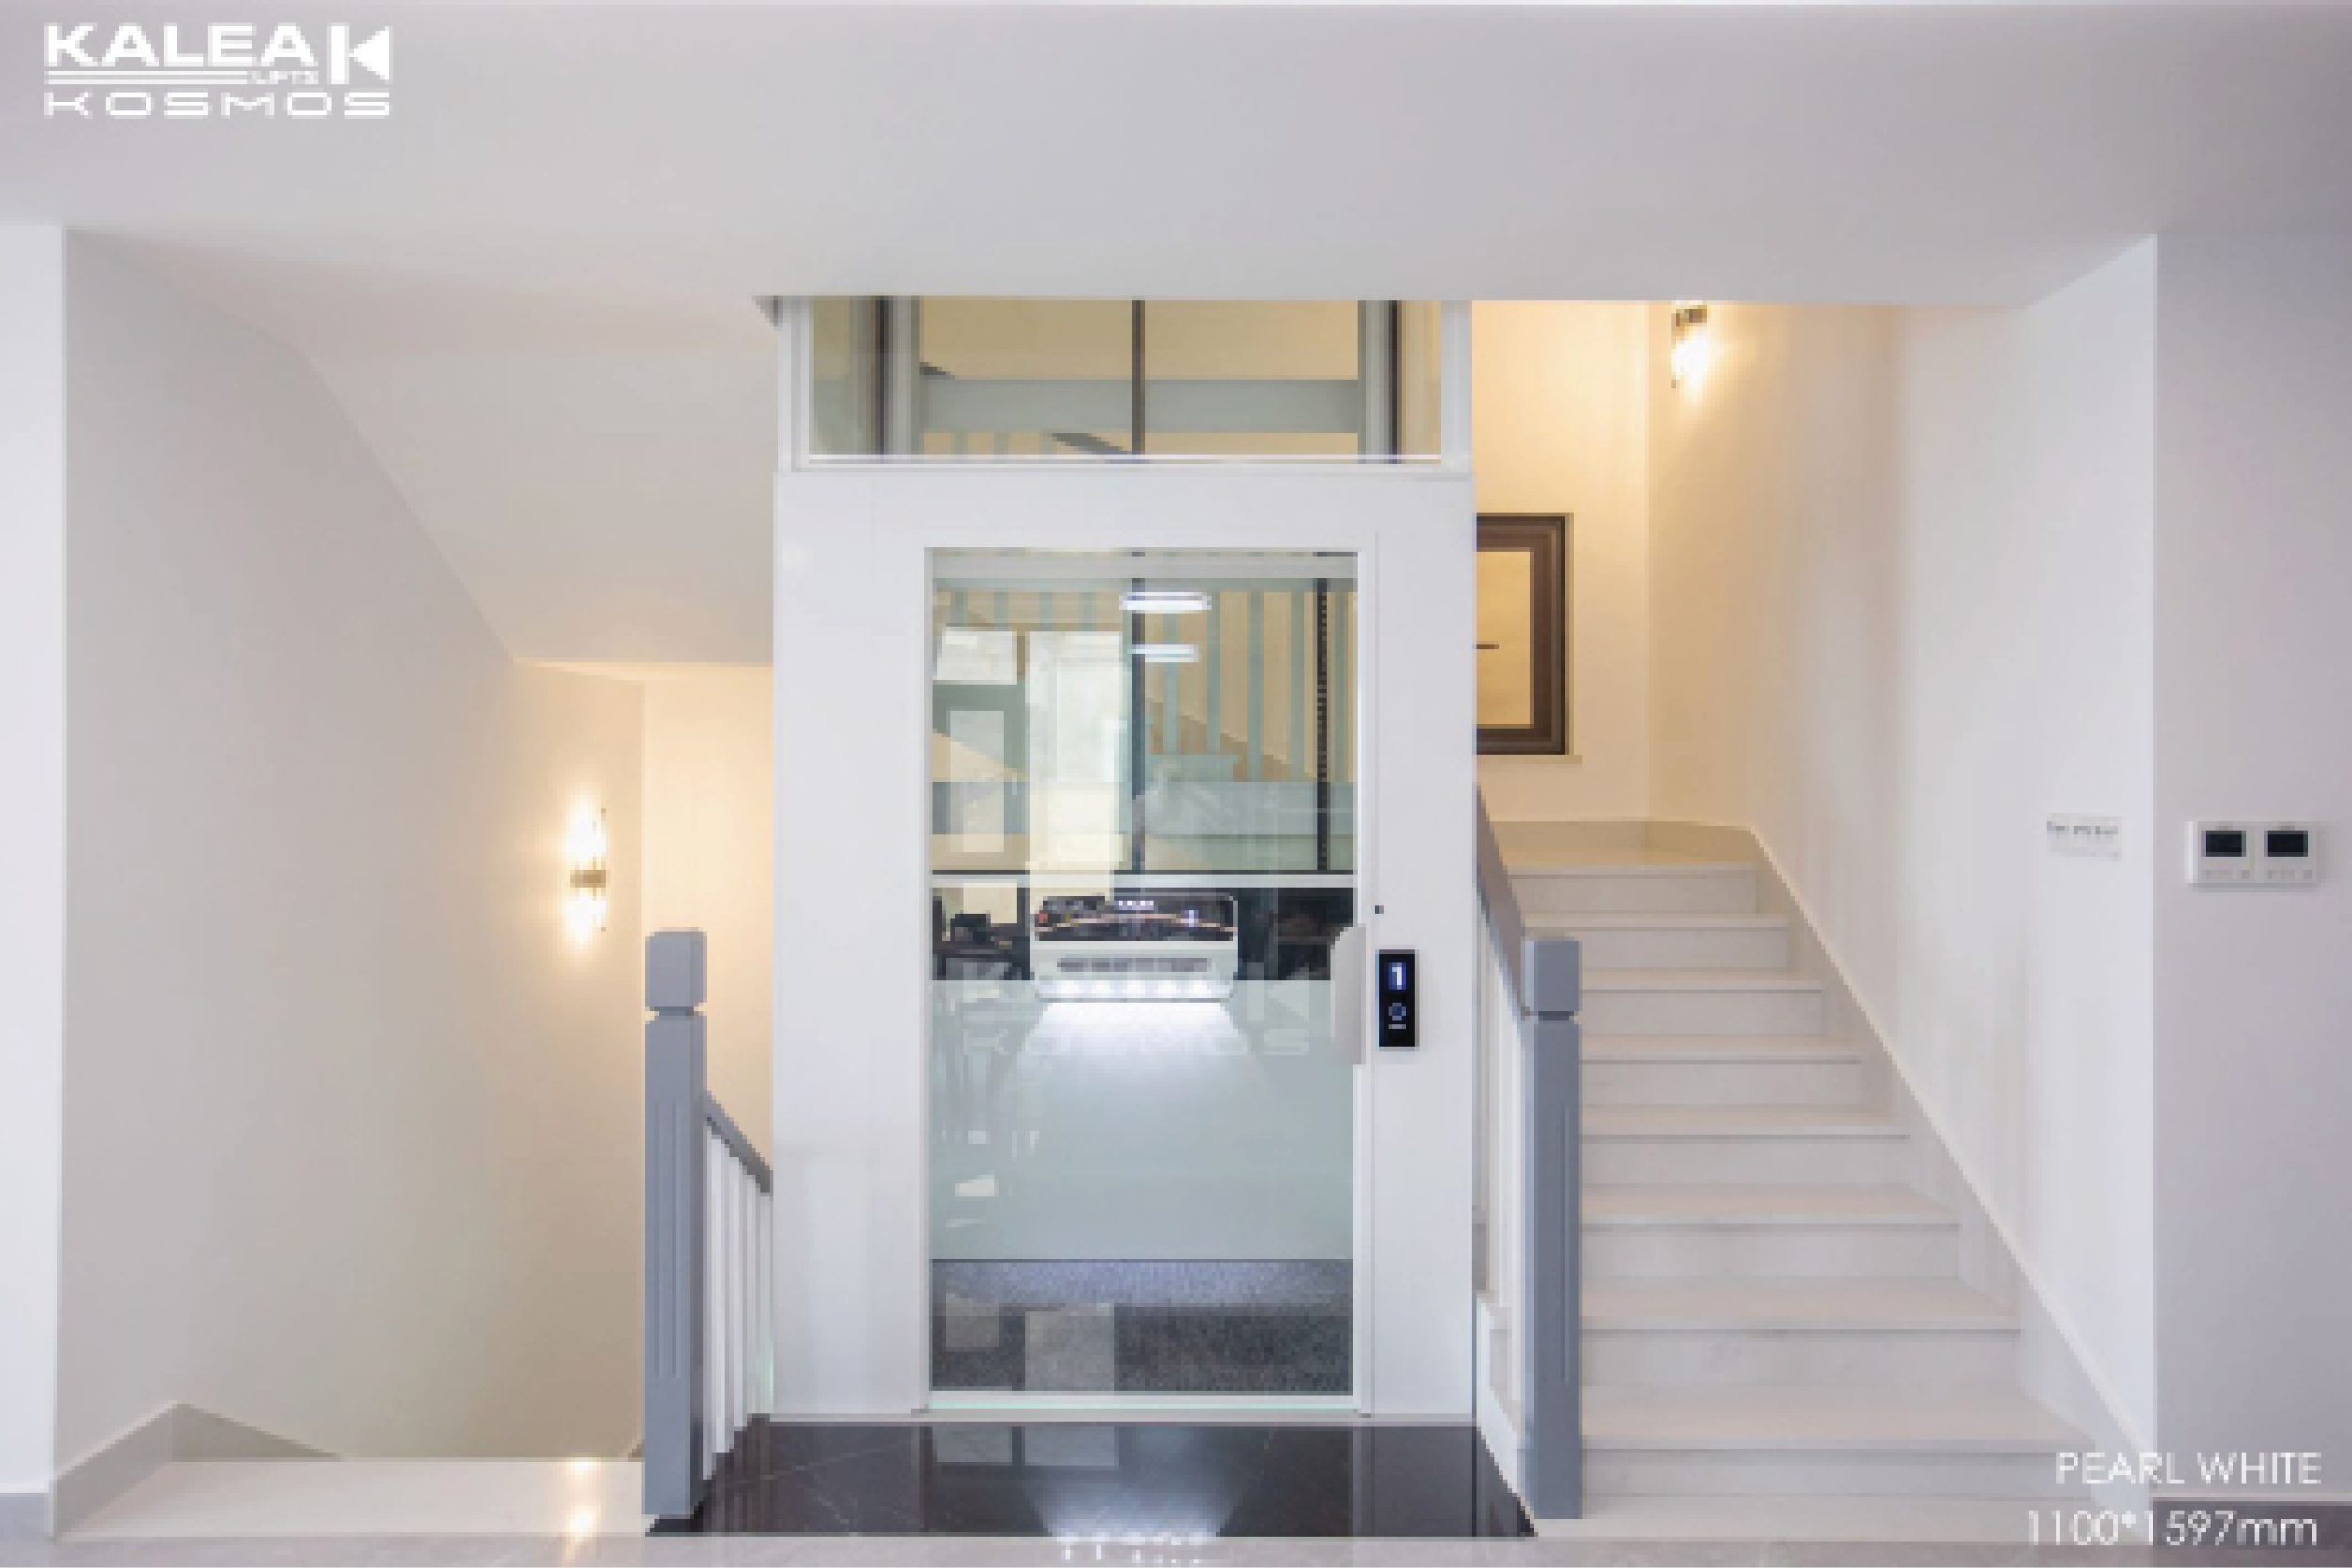 Private Home Middle Of Stair,Kosmos K90 model, All Glass Shaft Powder Coated White RAL9016